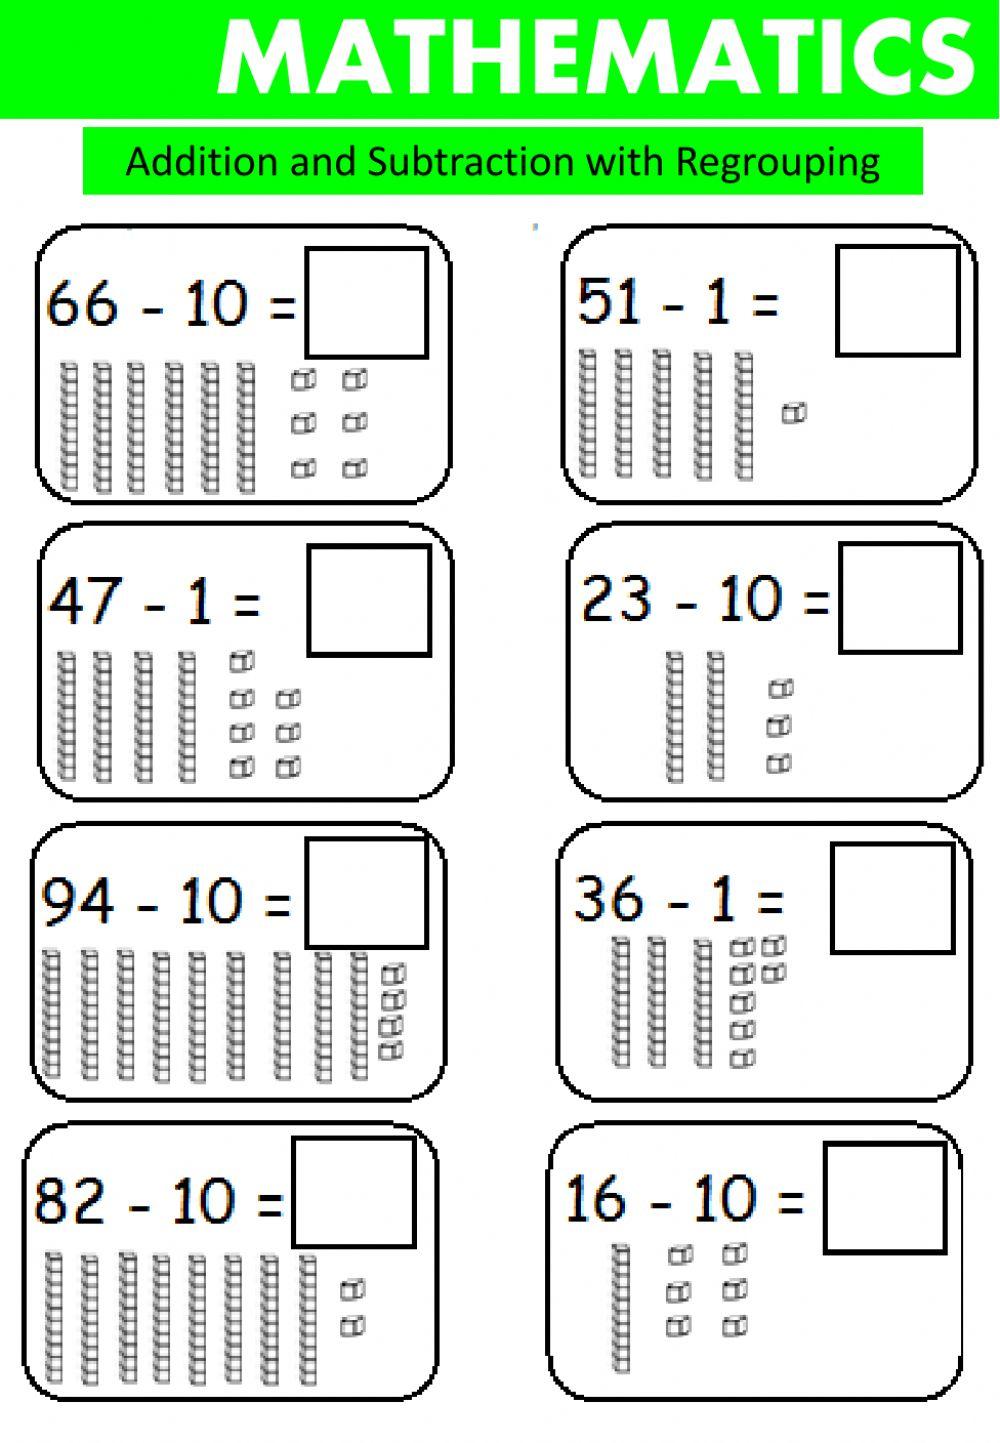 Addition and Subtraction with Regrouping